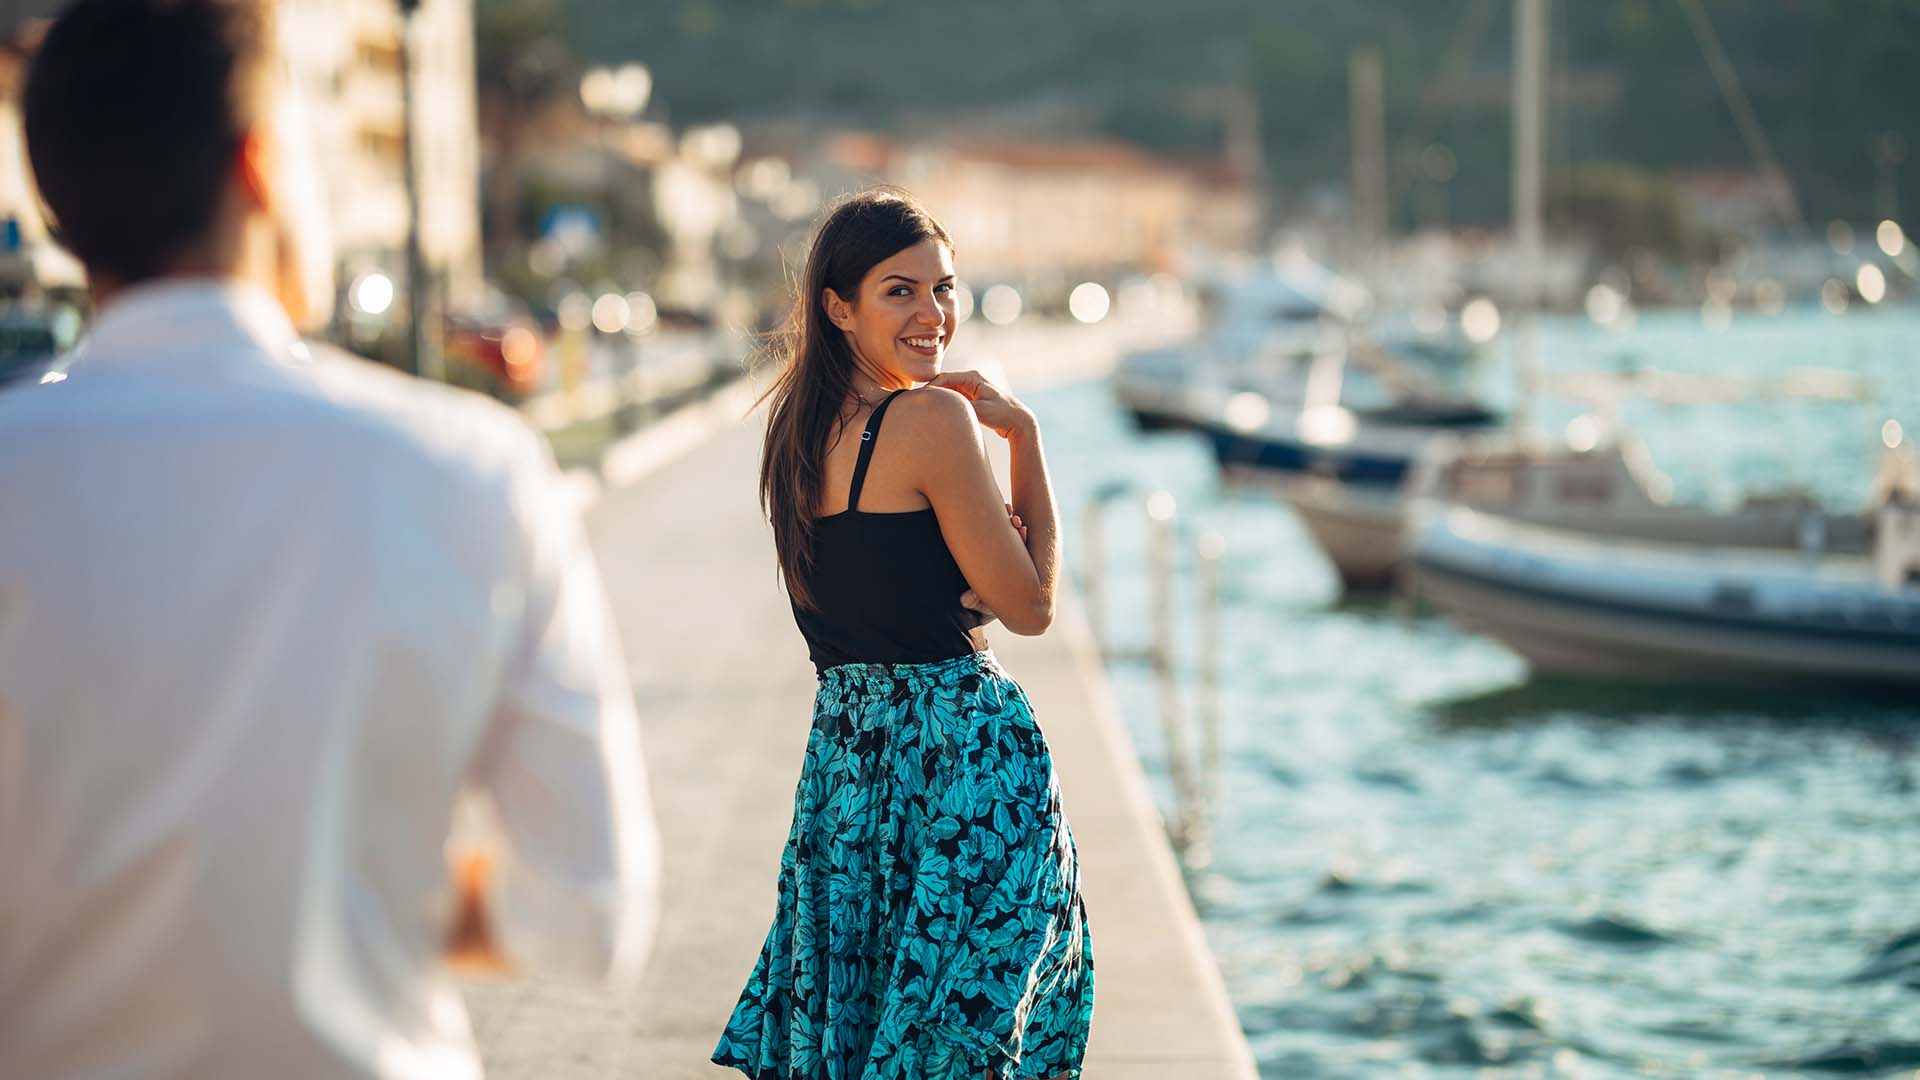 Brunette woman in blue skirt and black shirt looking back at a man in white shirt and smiling. They are at the docks.